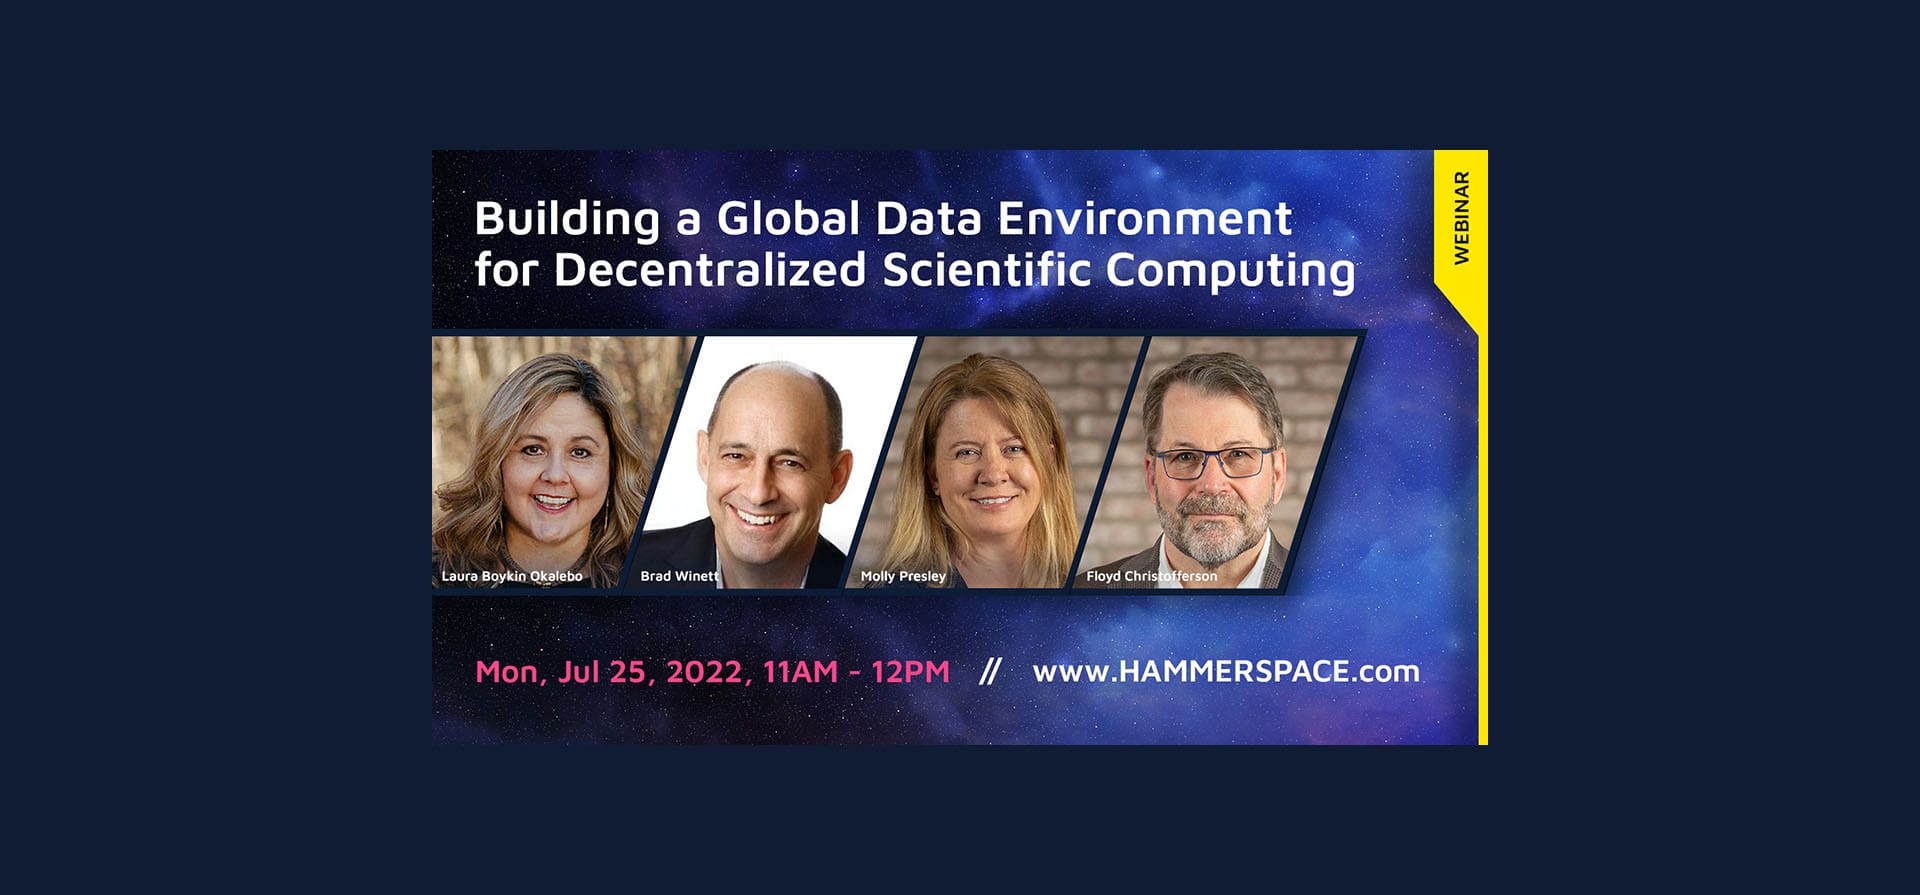 Building a Global Data Environment for Decentralized Scientific Computing | Jul 25, 2022